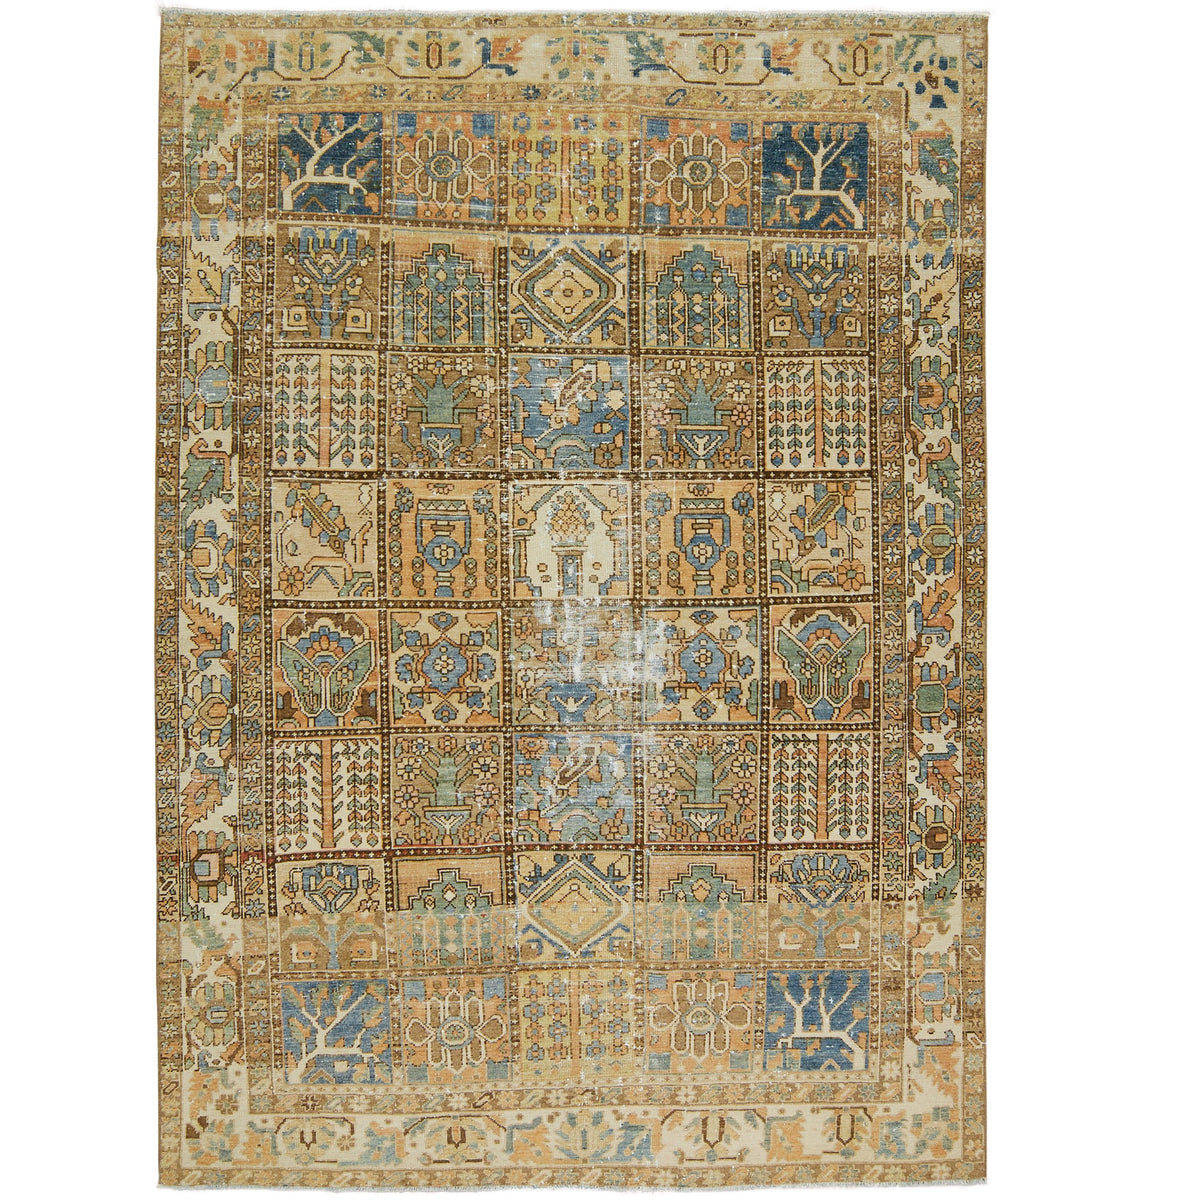 Valborg - A Palette of Persian Traditions | Kuden Rugs